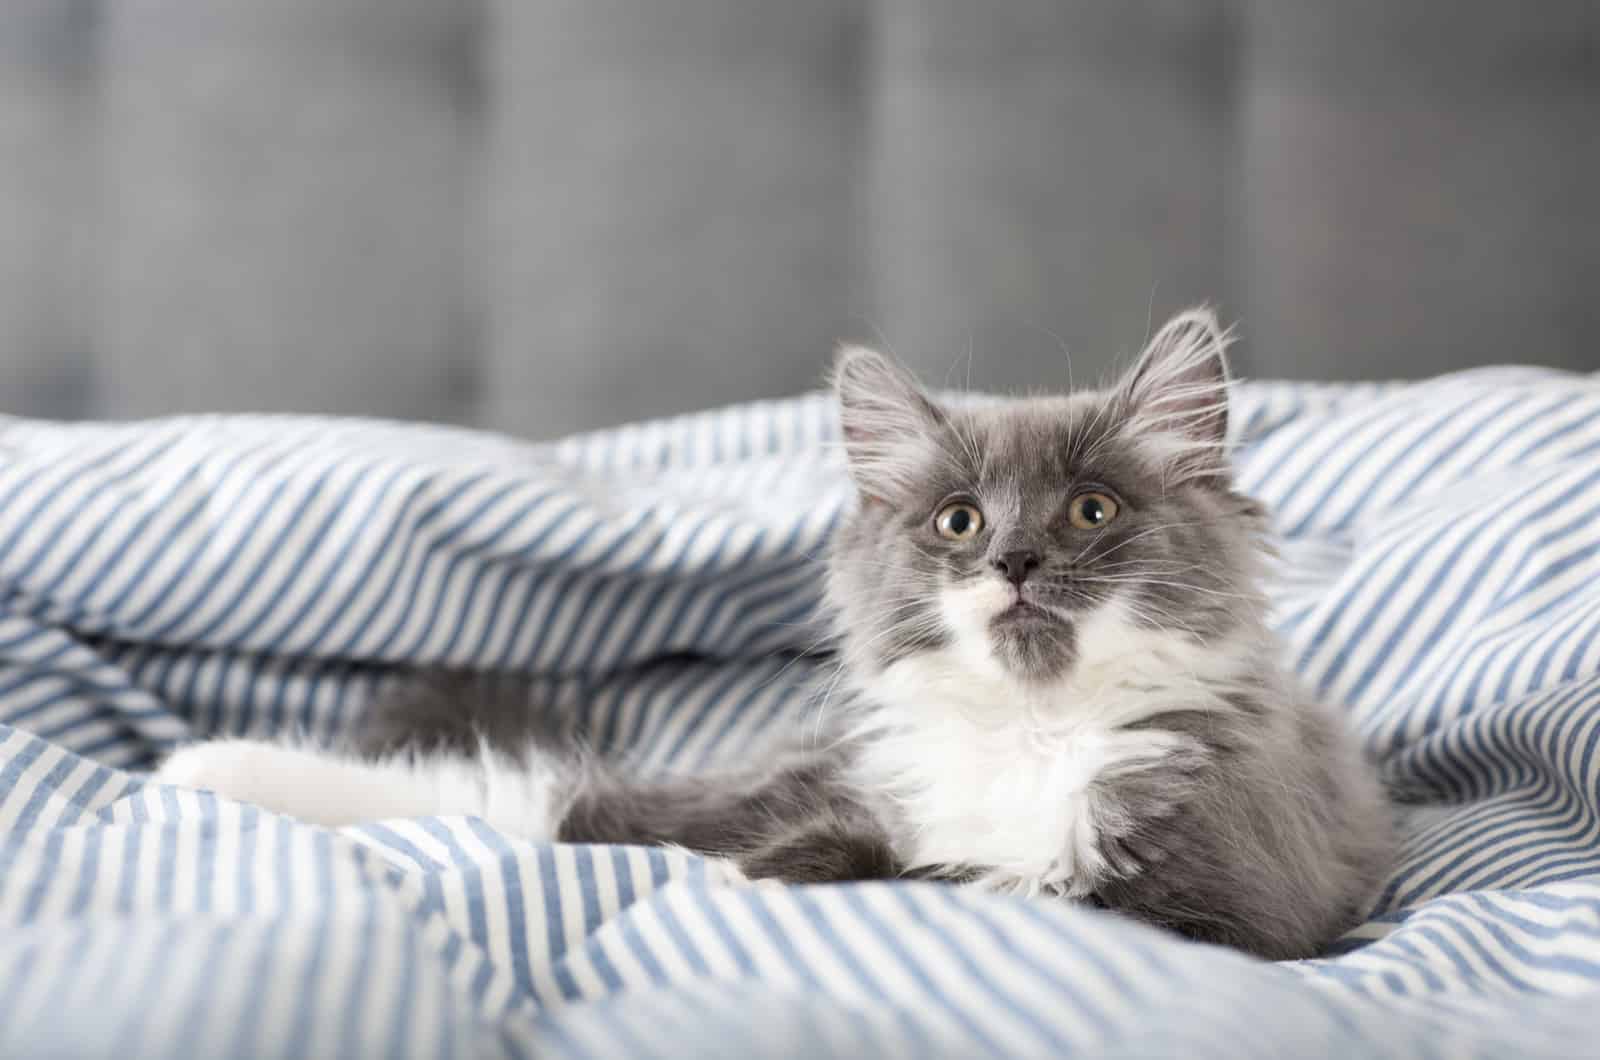 Fluffy Gray and White Kitten Relaxing on Bed